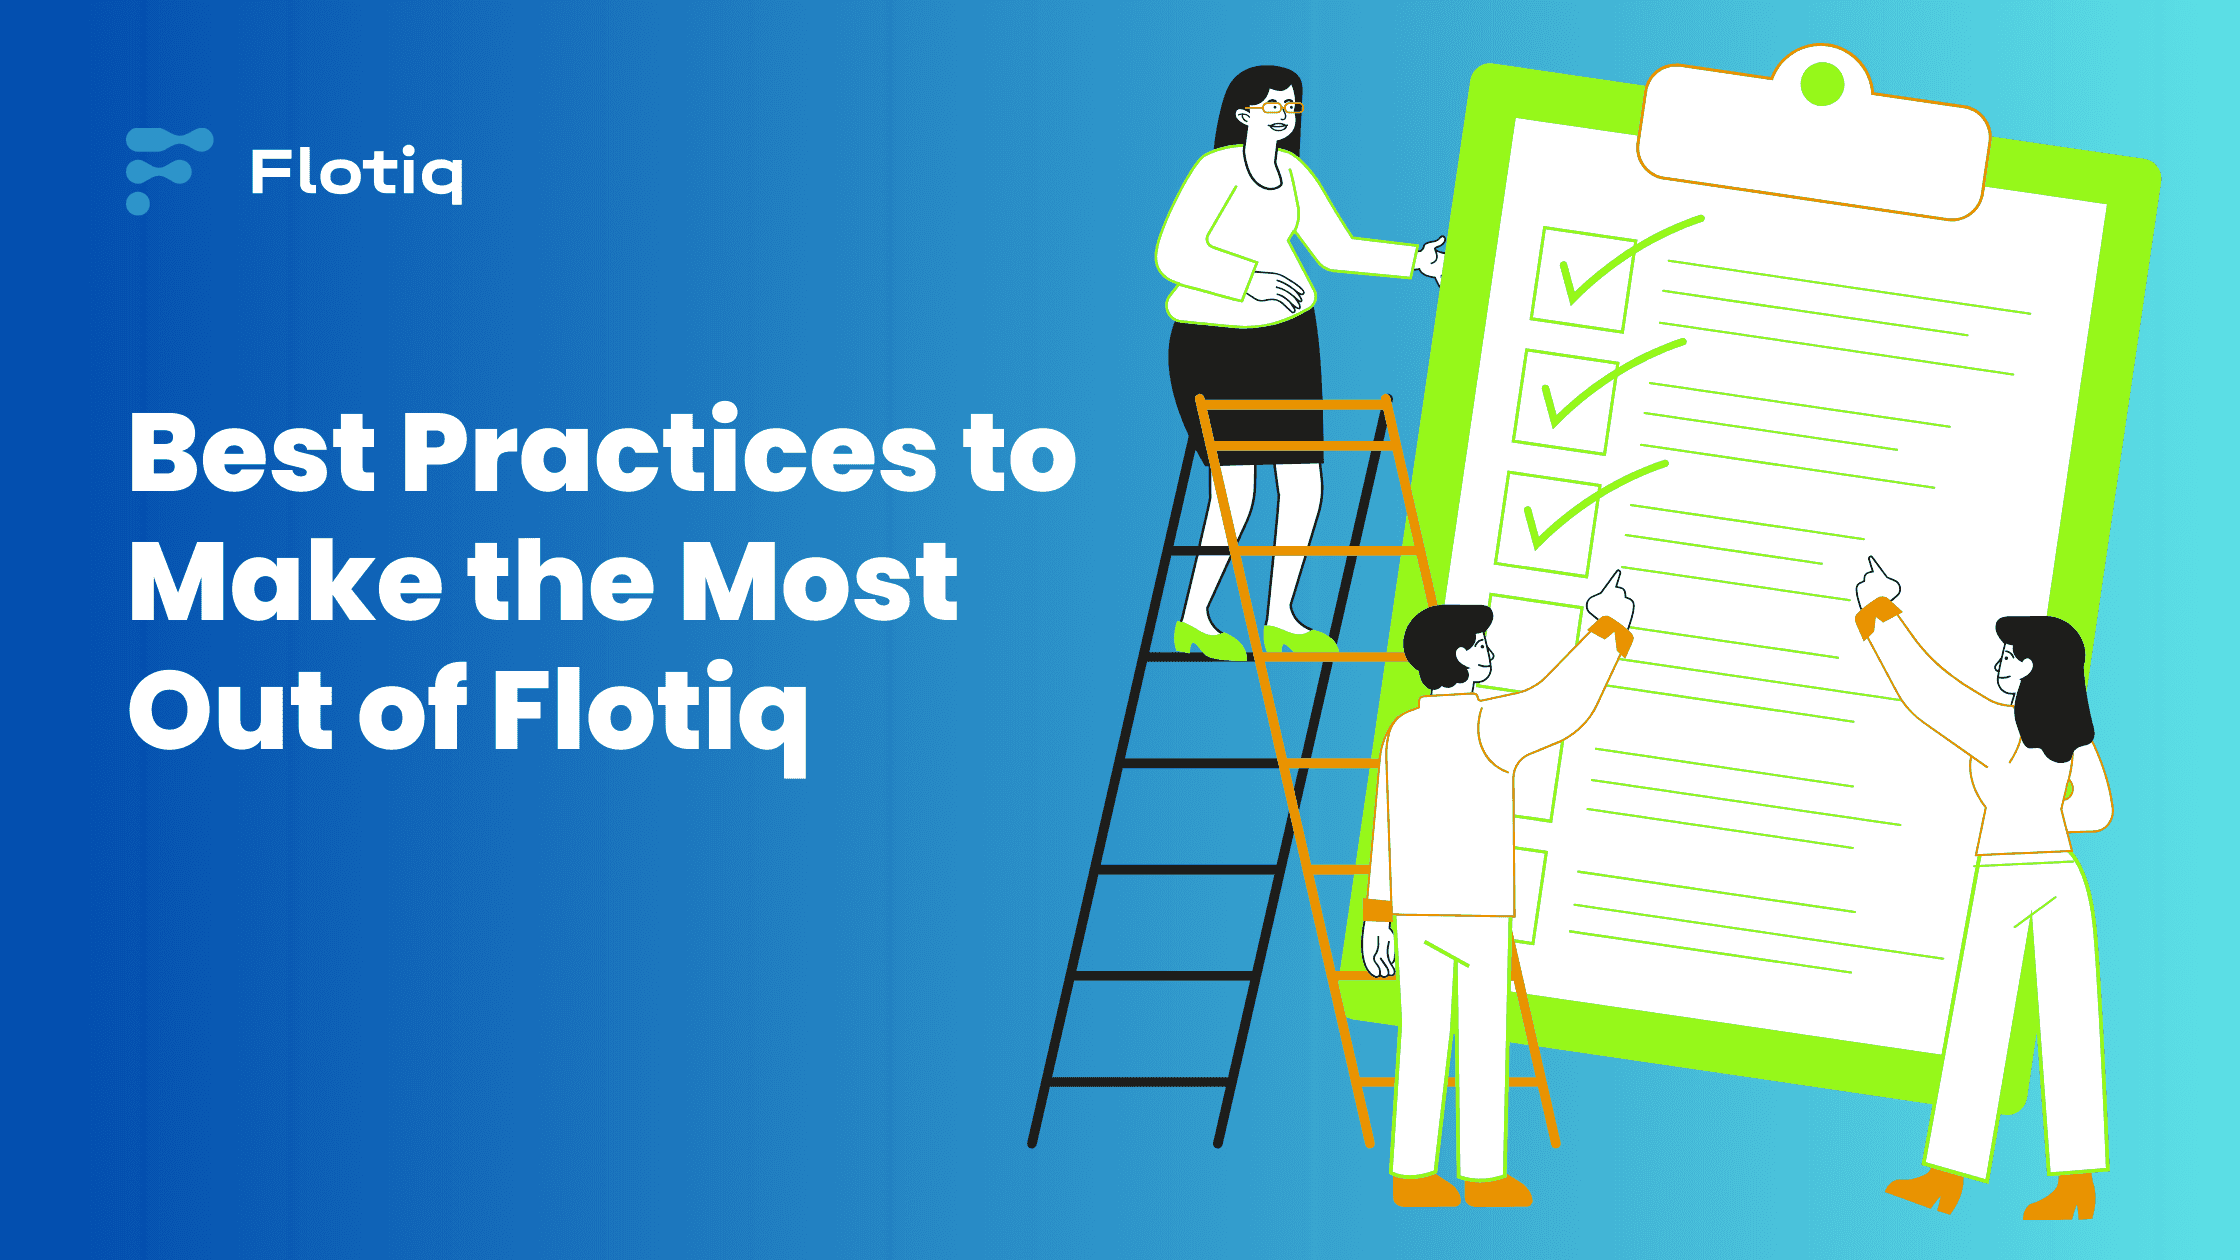 Best Practices to Make the Most Out of Flotiq